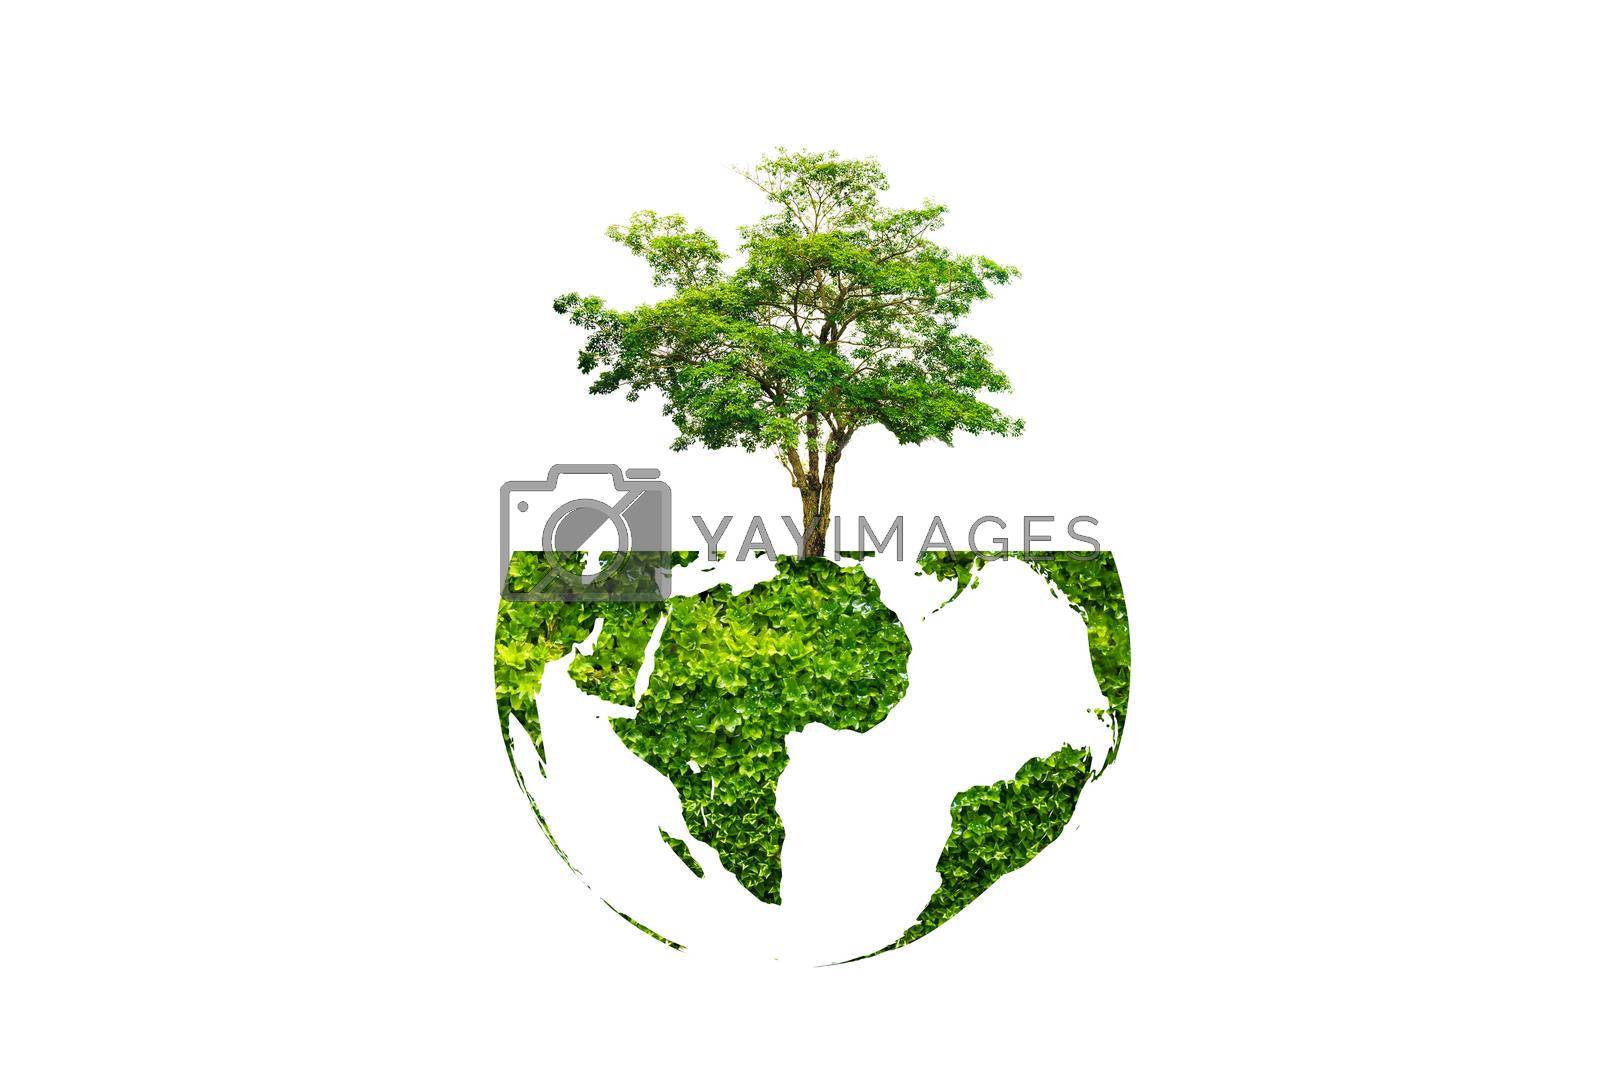 Royalty free image of earth day tree on green earth on white isolate background by sarayut_thaneerat